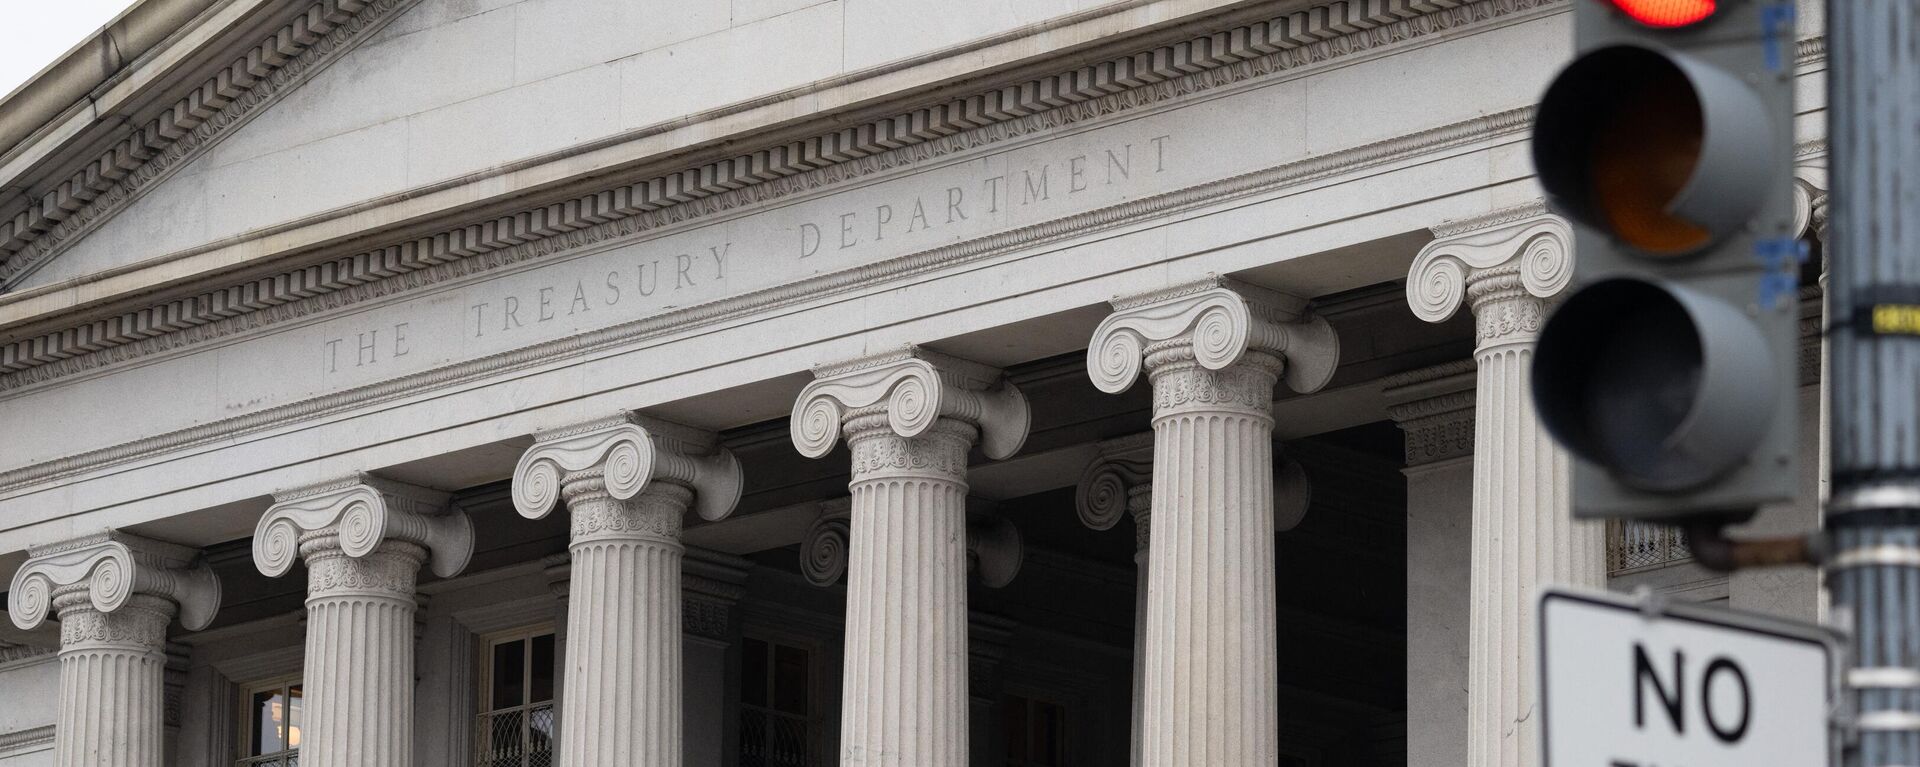 The US Treasury Department building is seen in Washington, DC, January 19, 2023, following an announcement by the US Treasury that it had begun taking measures Thursday to prevent a default on government debt, as Congress heads towards a high-stakes clash between Democrats and Republicans over raising the borrowing limit - Sputnik International, 1920, 08.05.2023